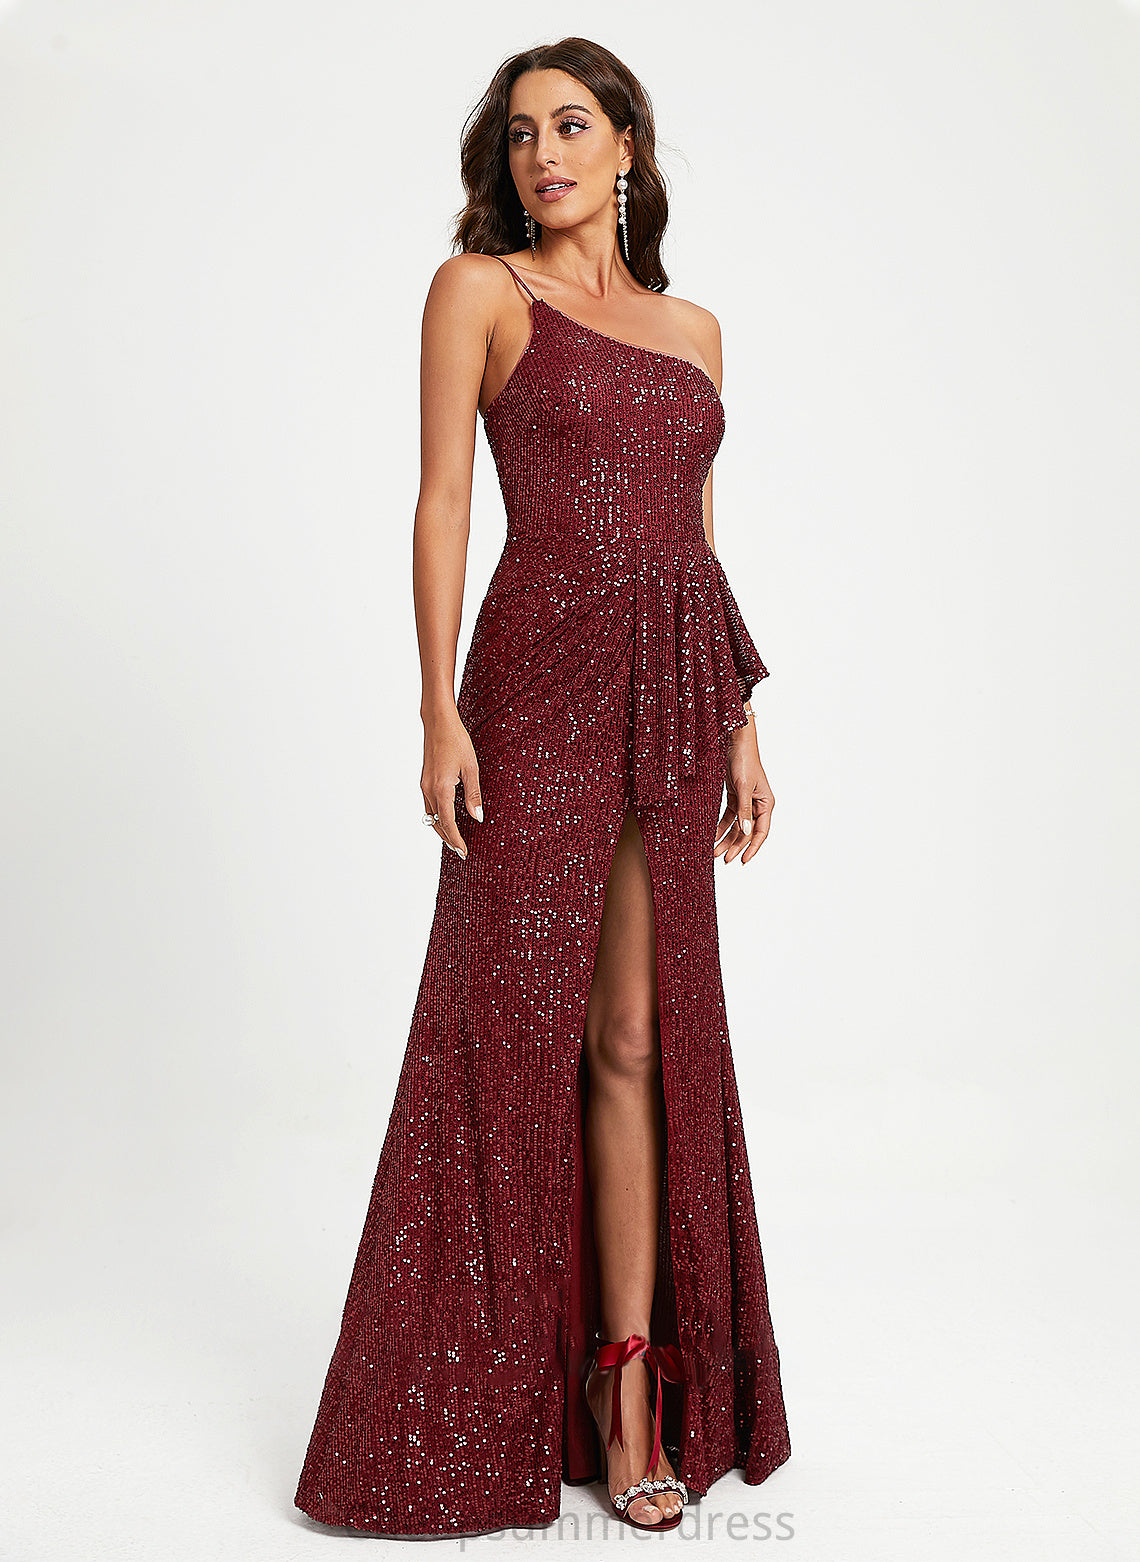 Prom Dresses Sequined Sequins Novia Floor-Length Sheath/Column One-Shoulder With Ruffle